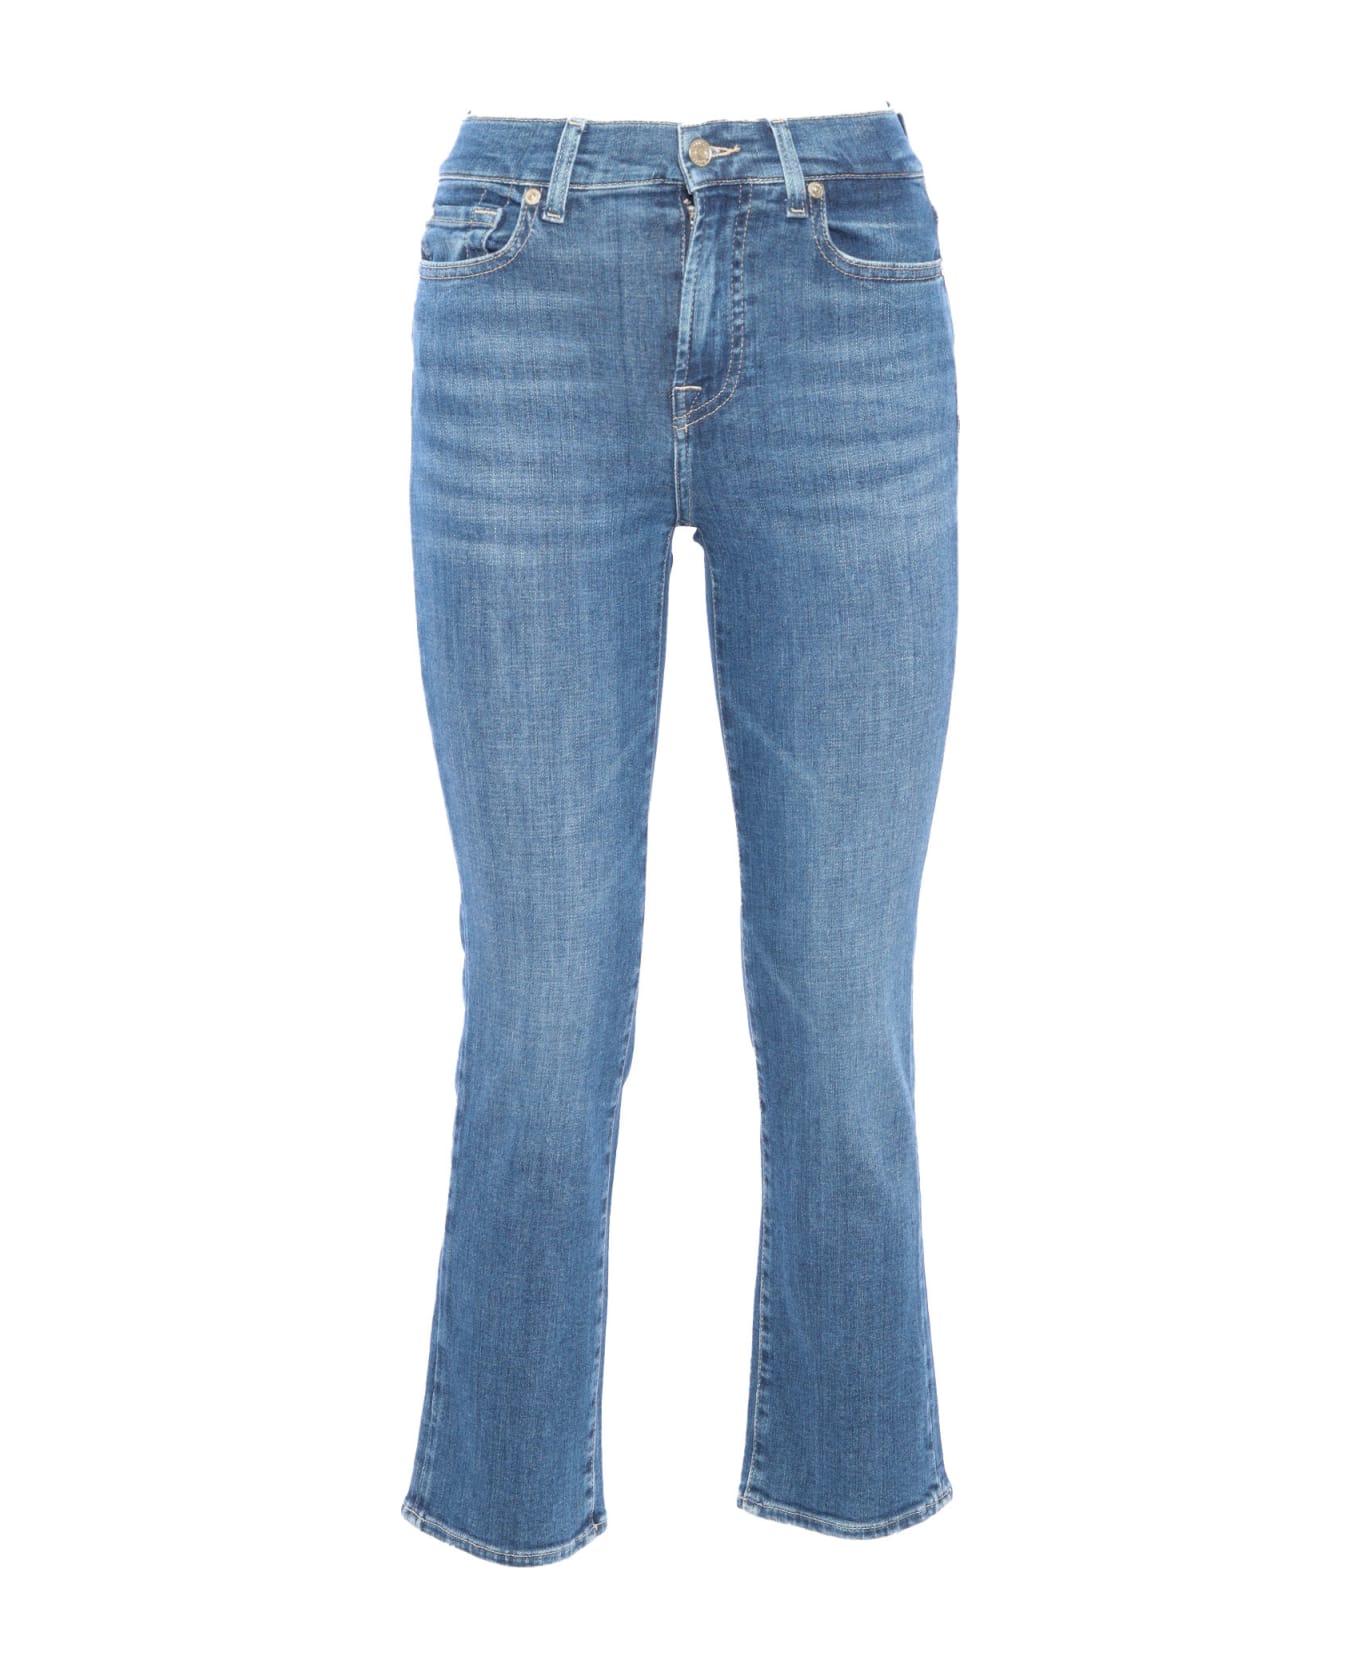 7 For All Mankind Cropped Women's Jeans. - BLUE デニム